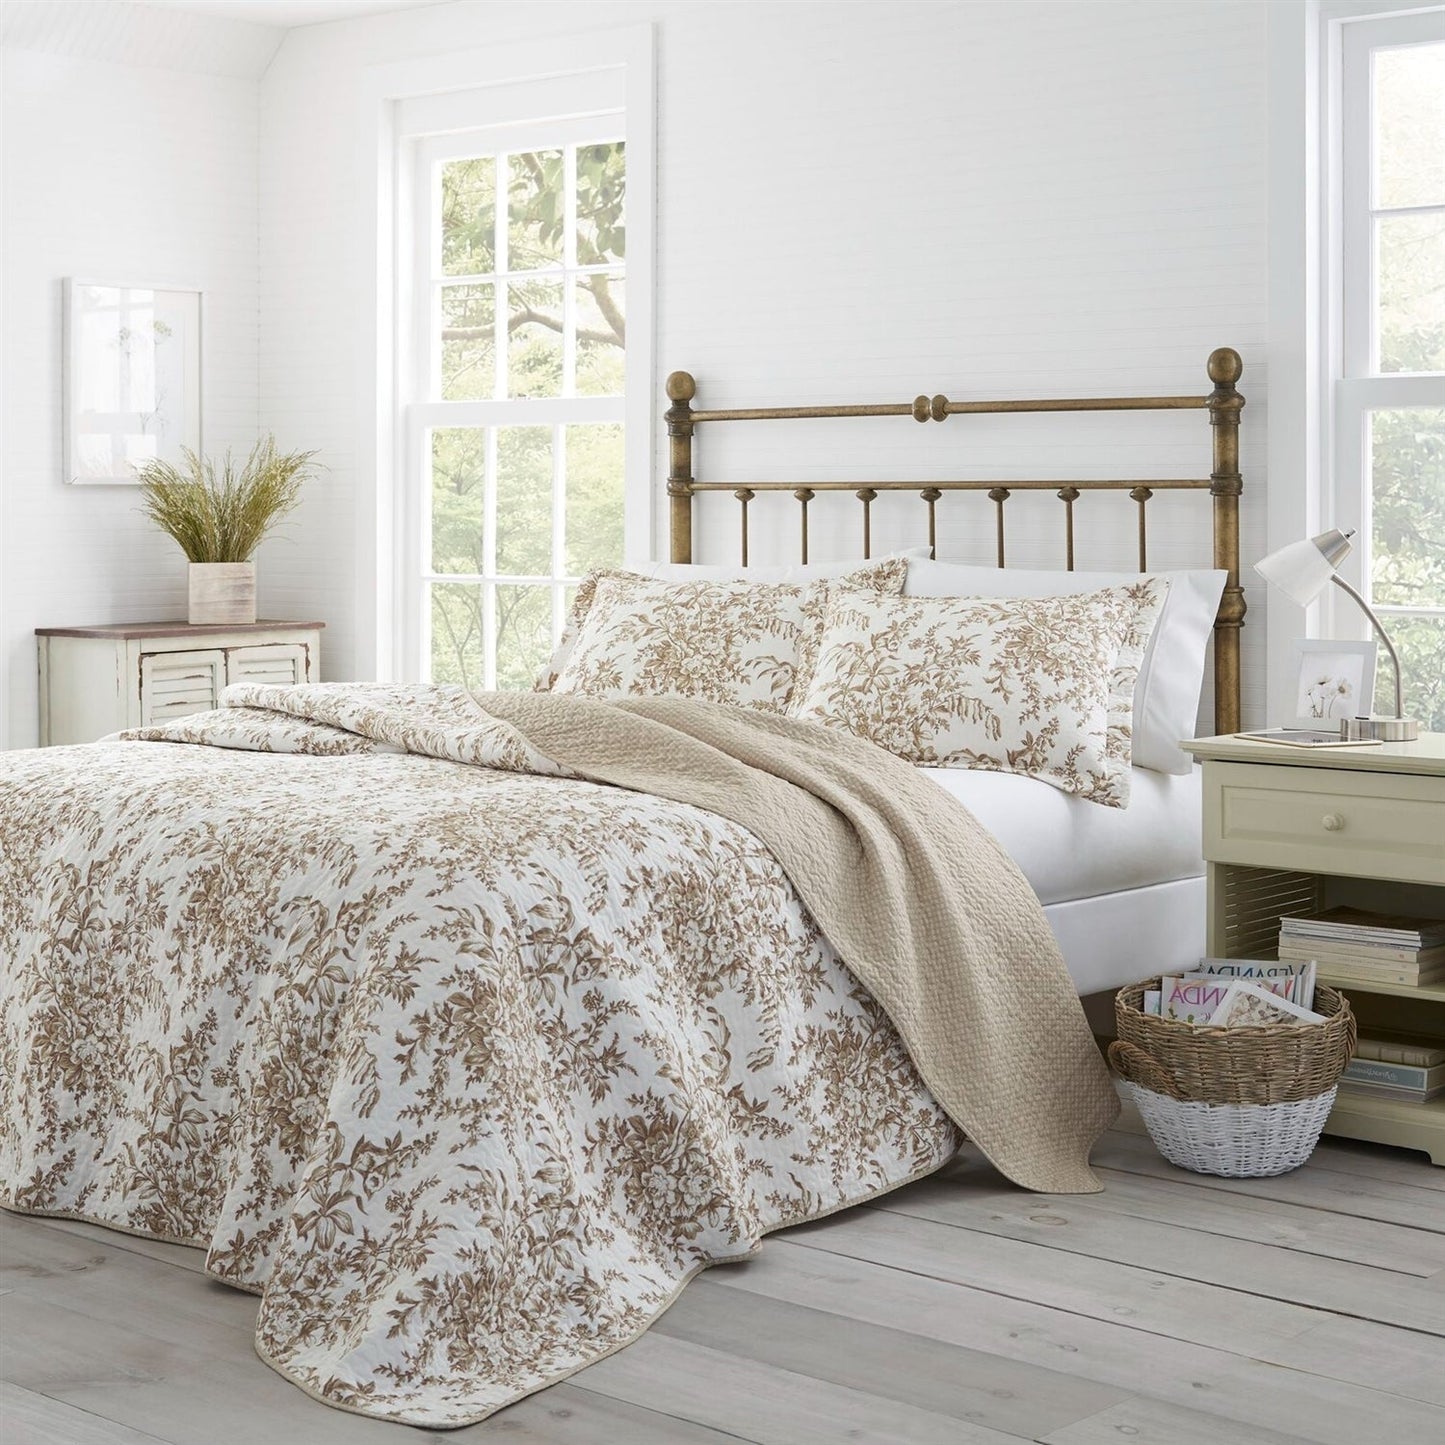 Bedroom > Quilts & Blankets - King Size 3 Piece Bed-in-a-Bag Bohemian Tan Beige Floral Cotton Quilt Set